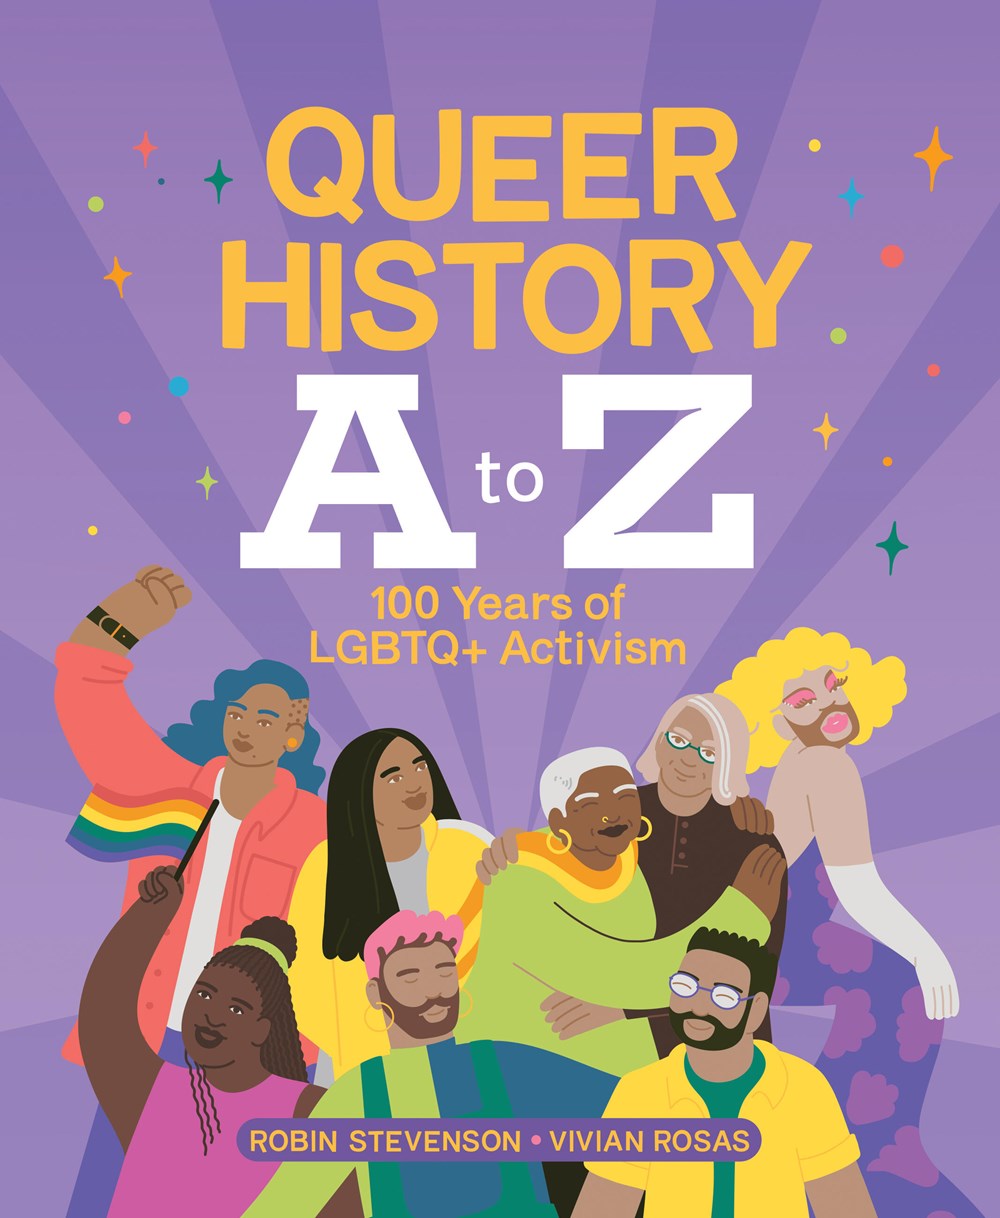 Queer History A to Z : 100 Years of LGBTQ+ Activism